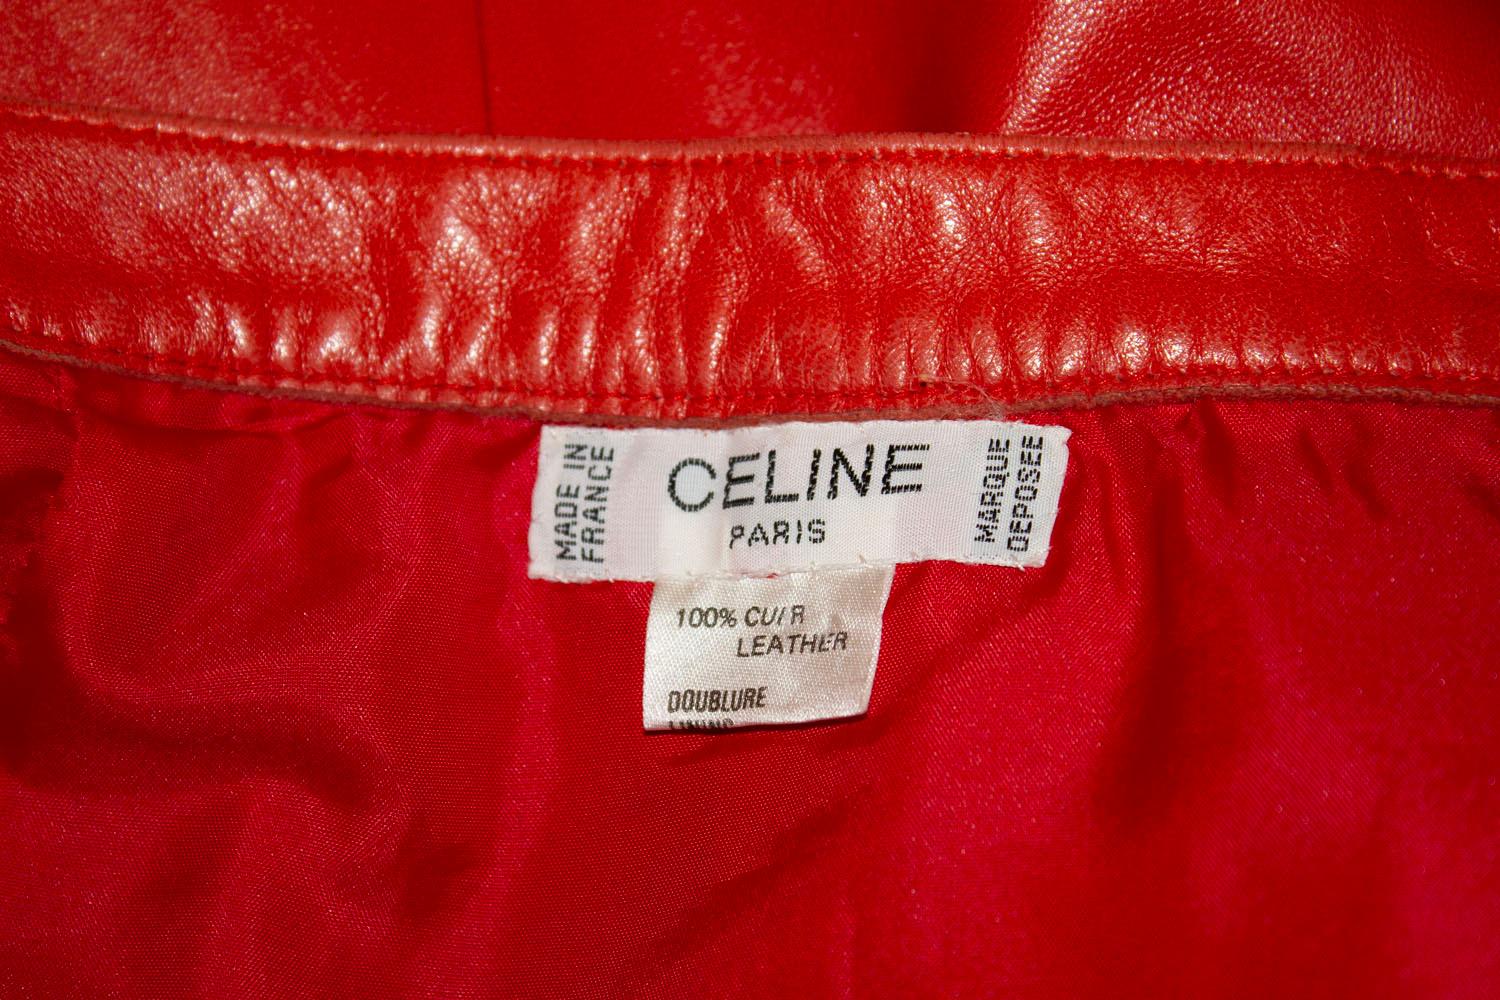 A wonderful vintage leather skirt by Celine.
The skirt was made in France and has all the original Celine popper fastenings.
It is A line  and fully lined. it has some small biro marks that may come off.
Measurements waist 27'',length 28''